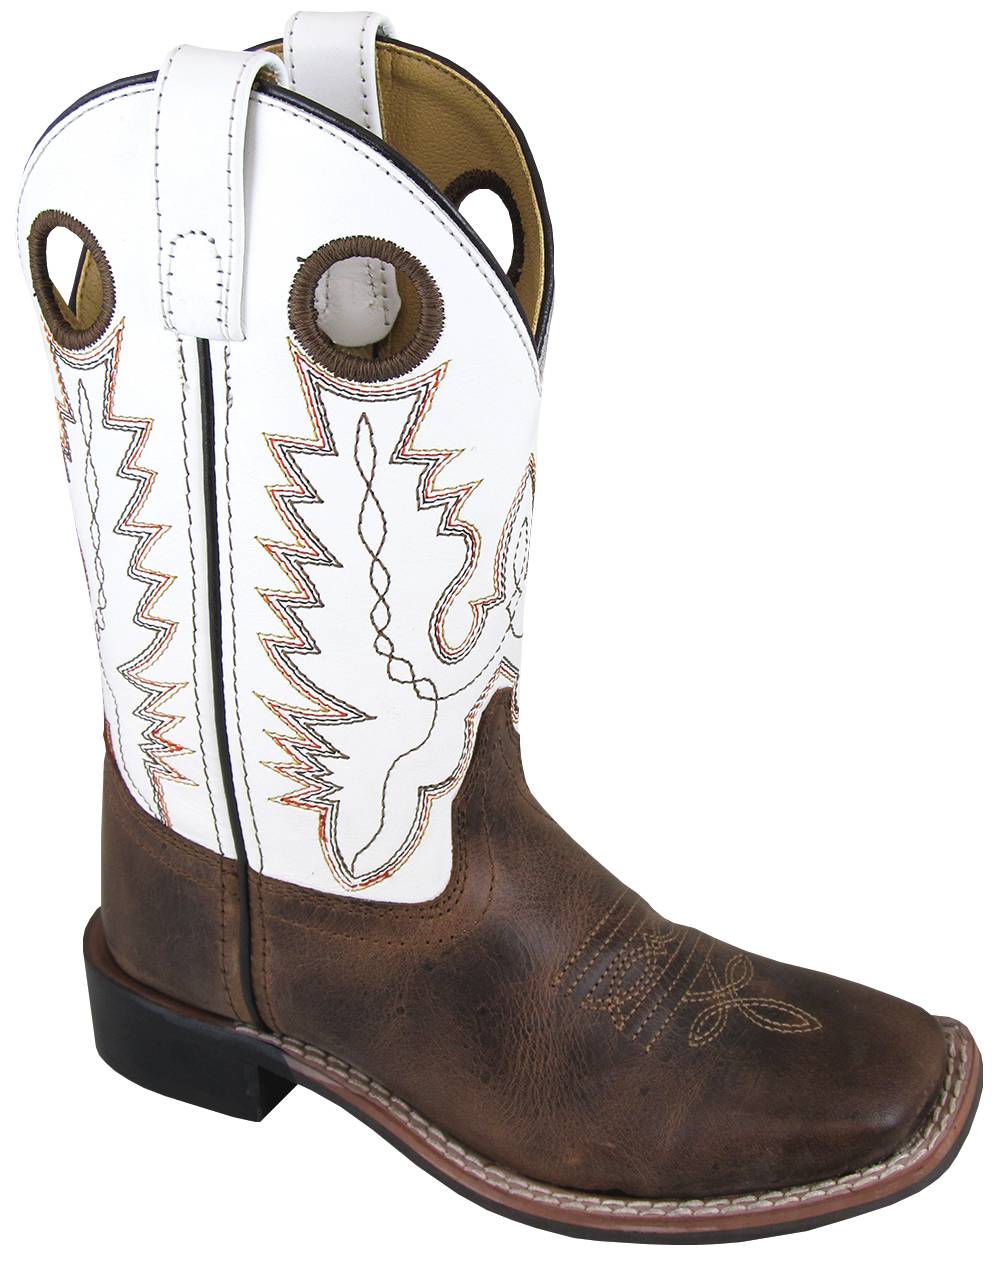 youth cowboy boots